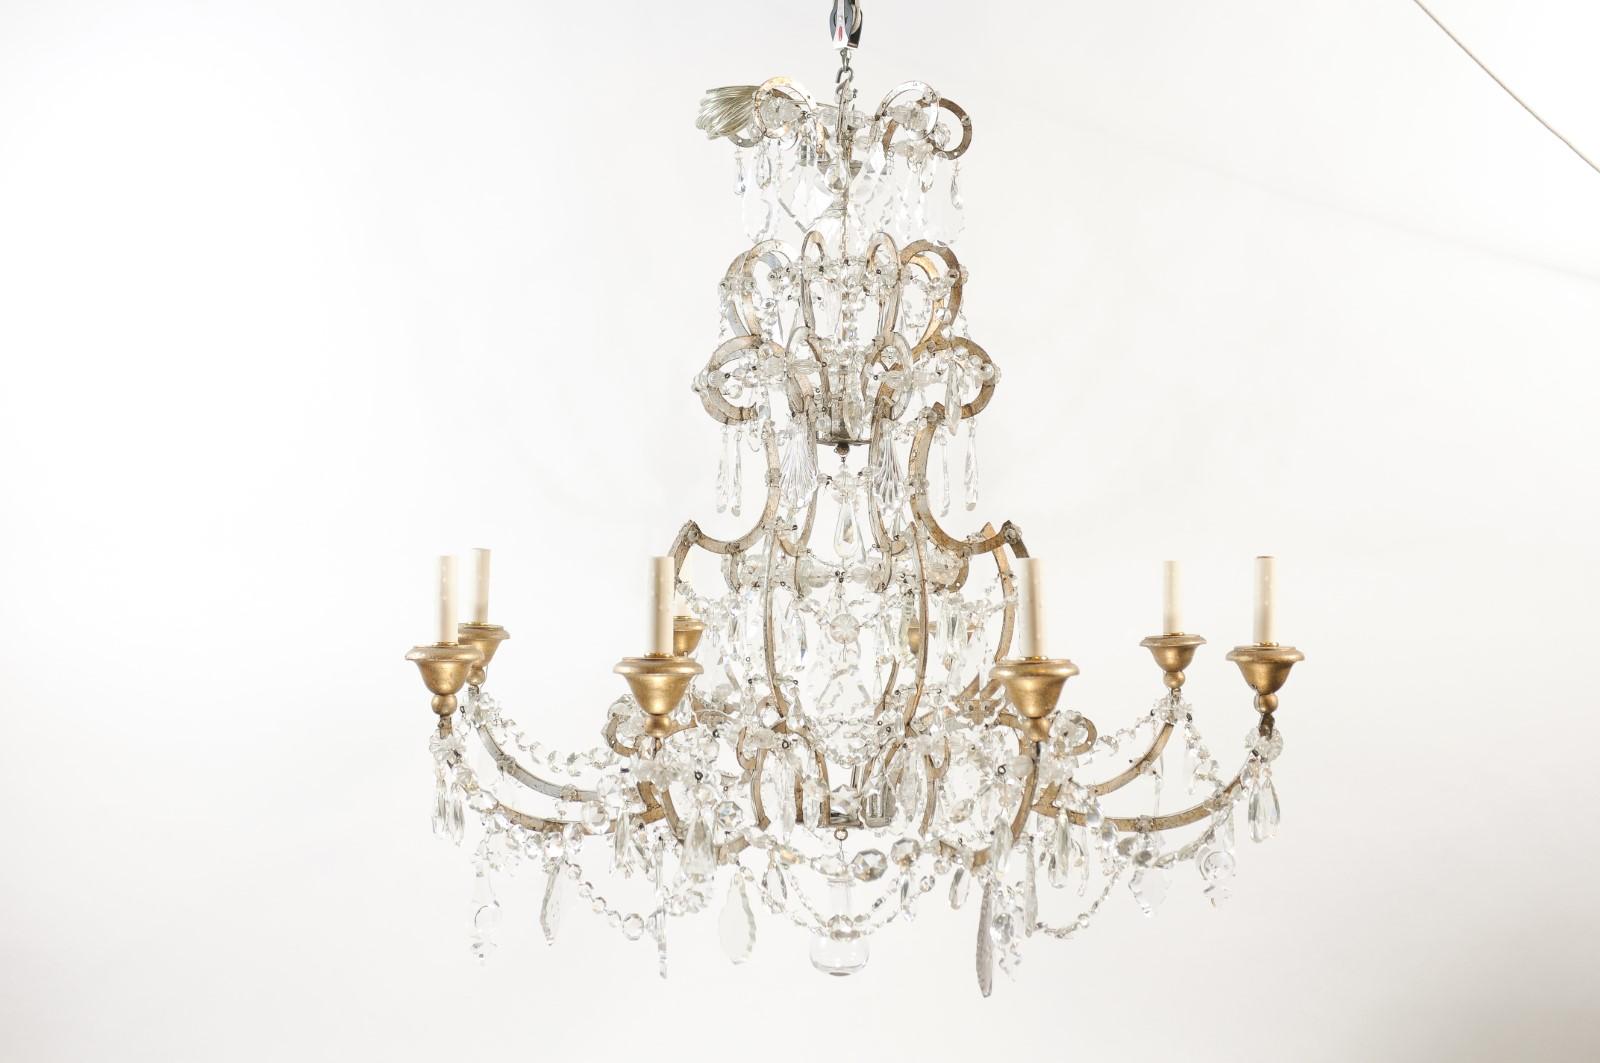 Italian Crystal & Silvered Wood Chandelier with 8 Lights, 19th Century For Sale 7